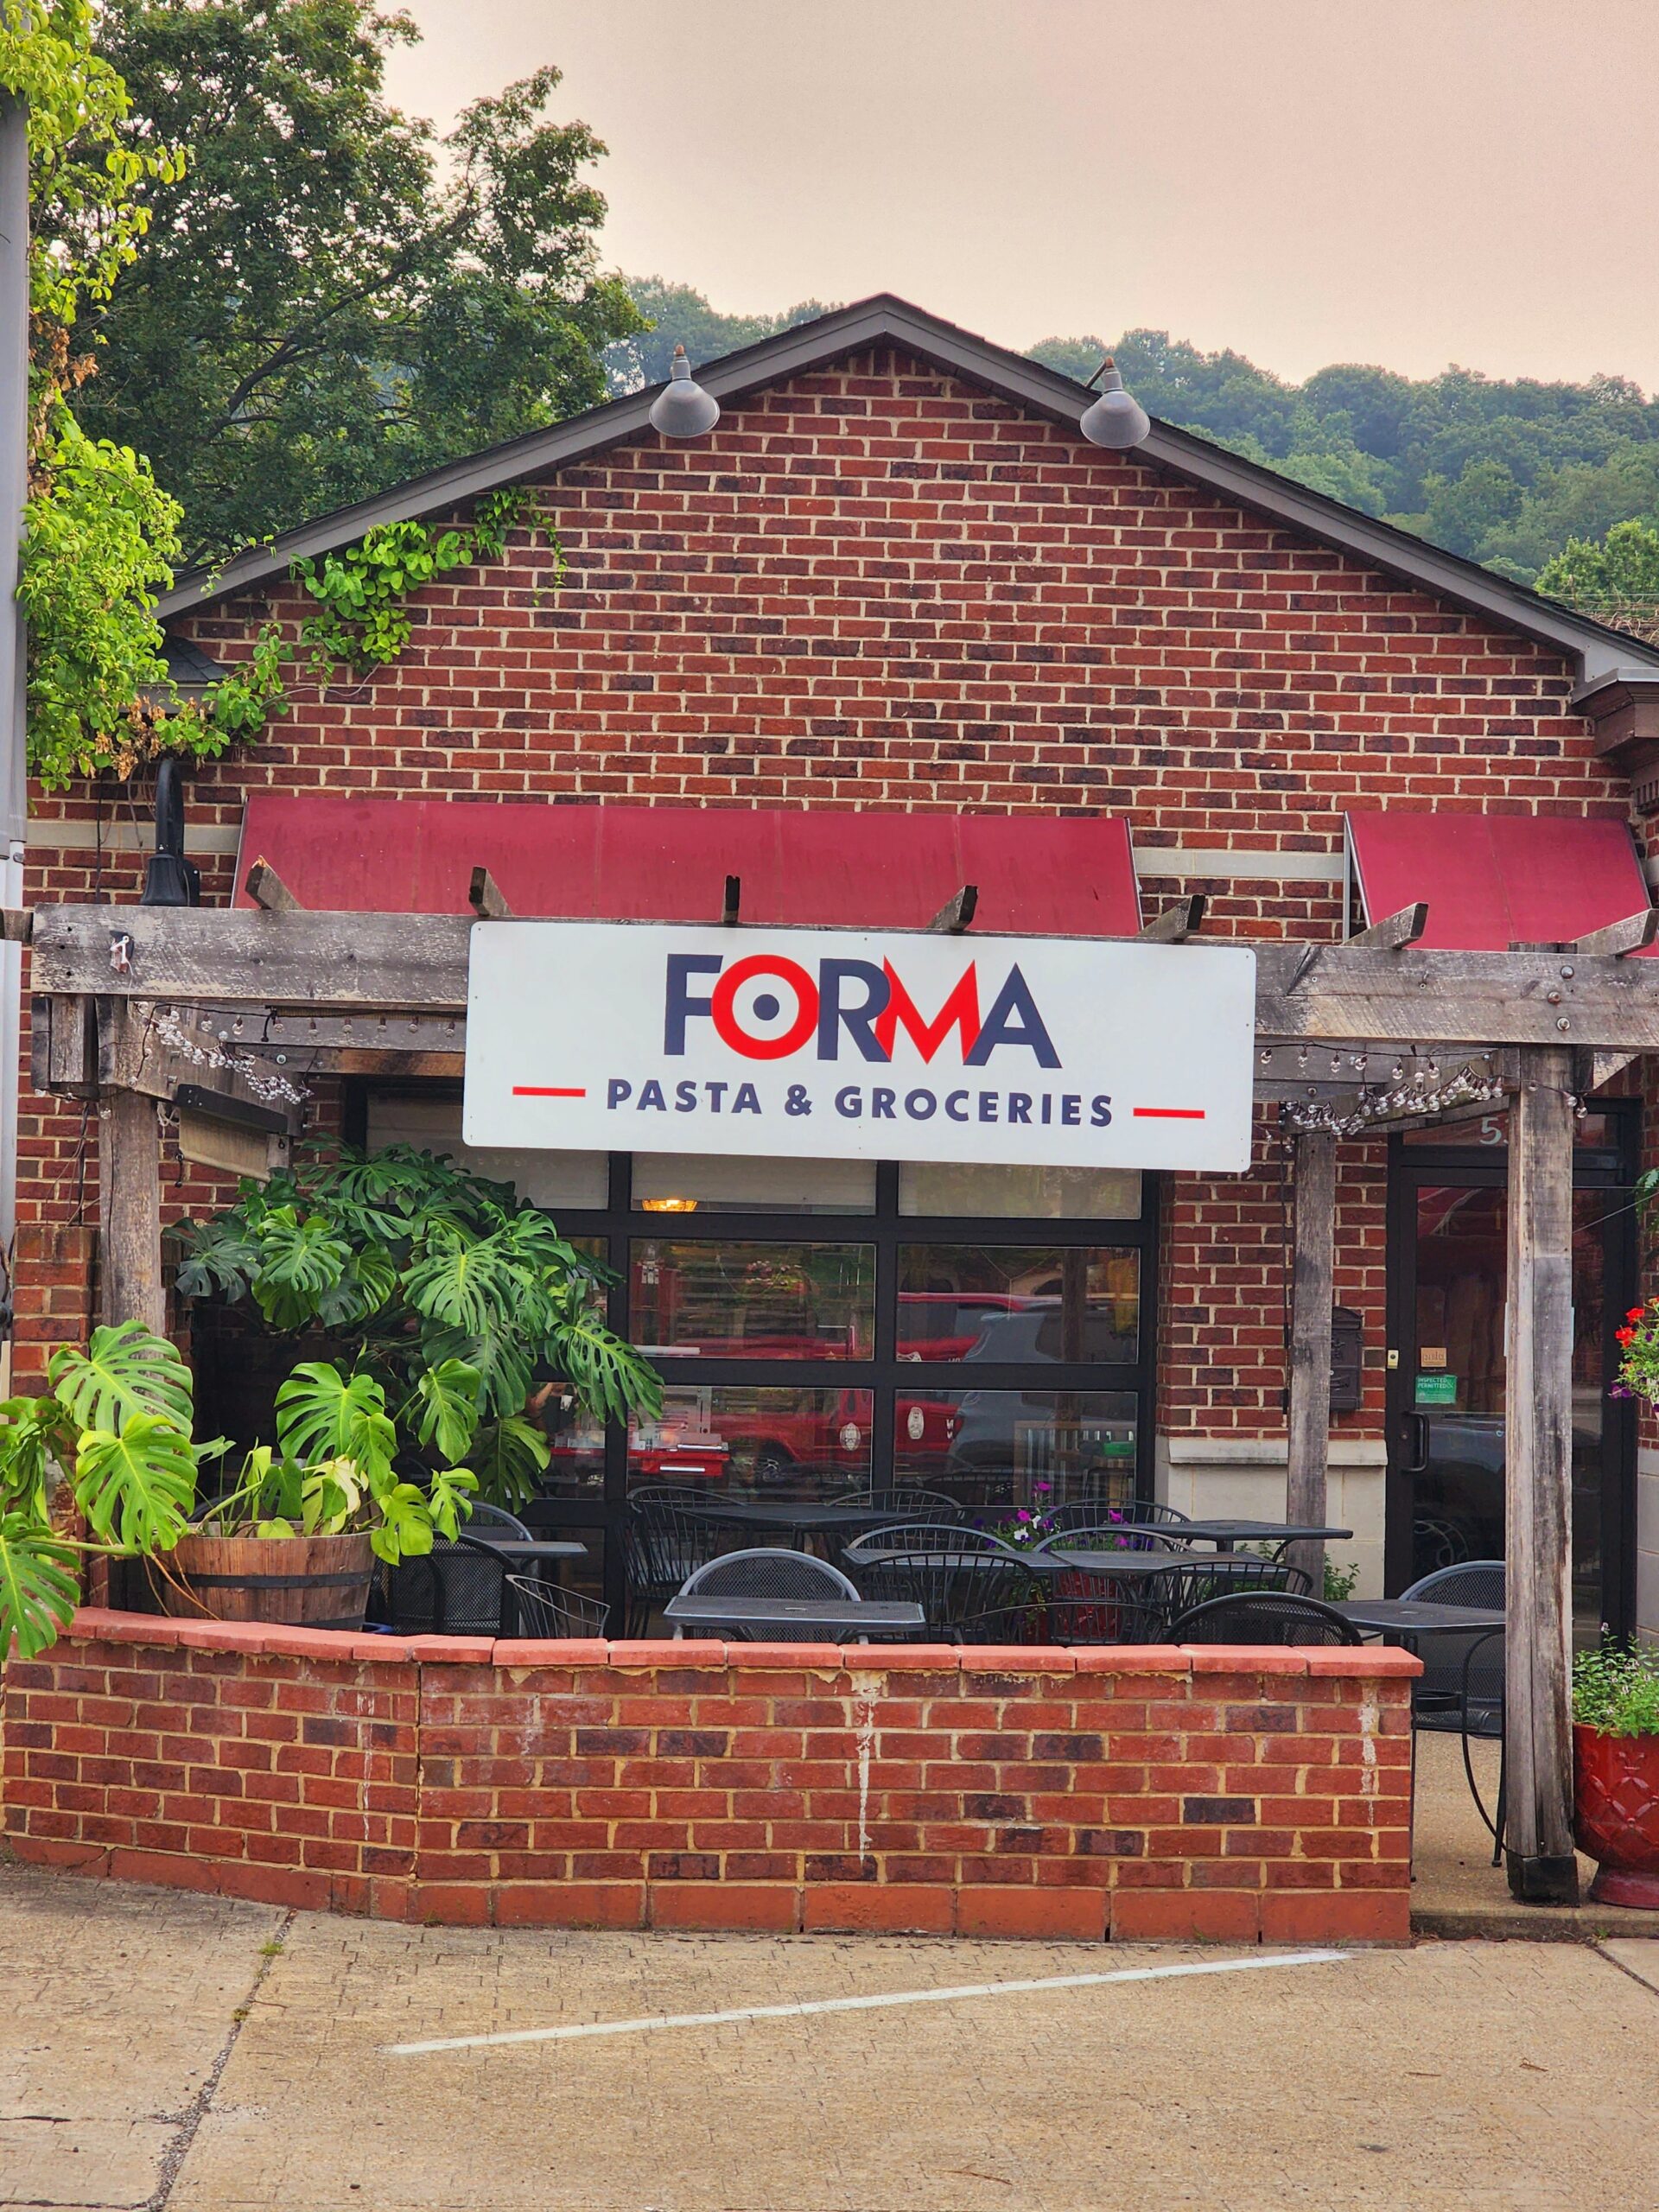 WHAT IS FORMA PASTA?